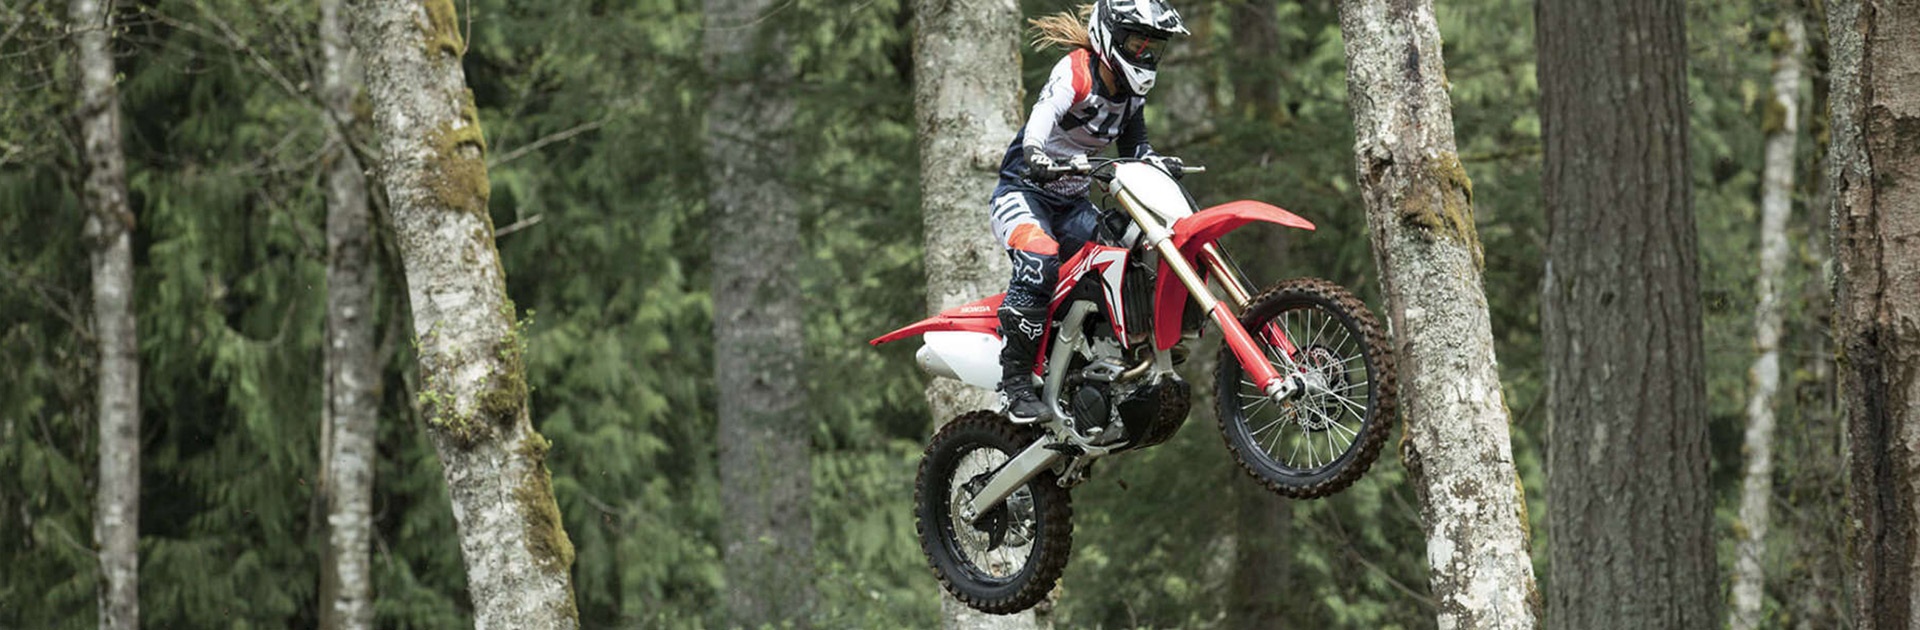 Cross-country appetite with motocross DNA!